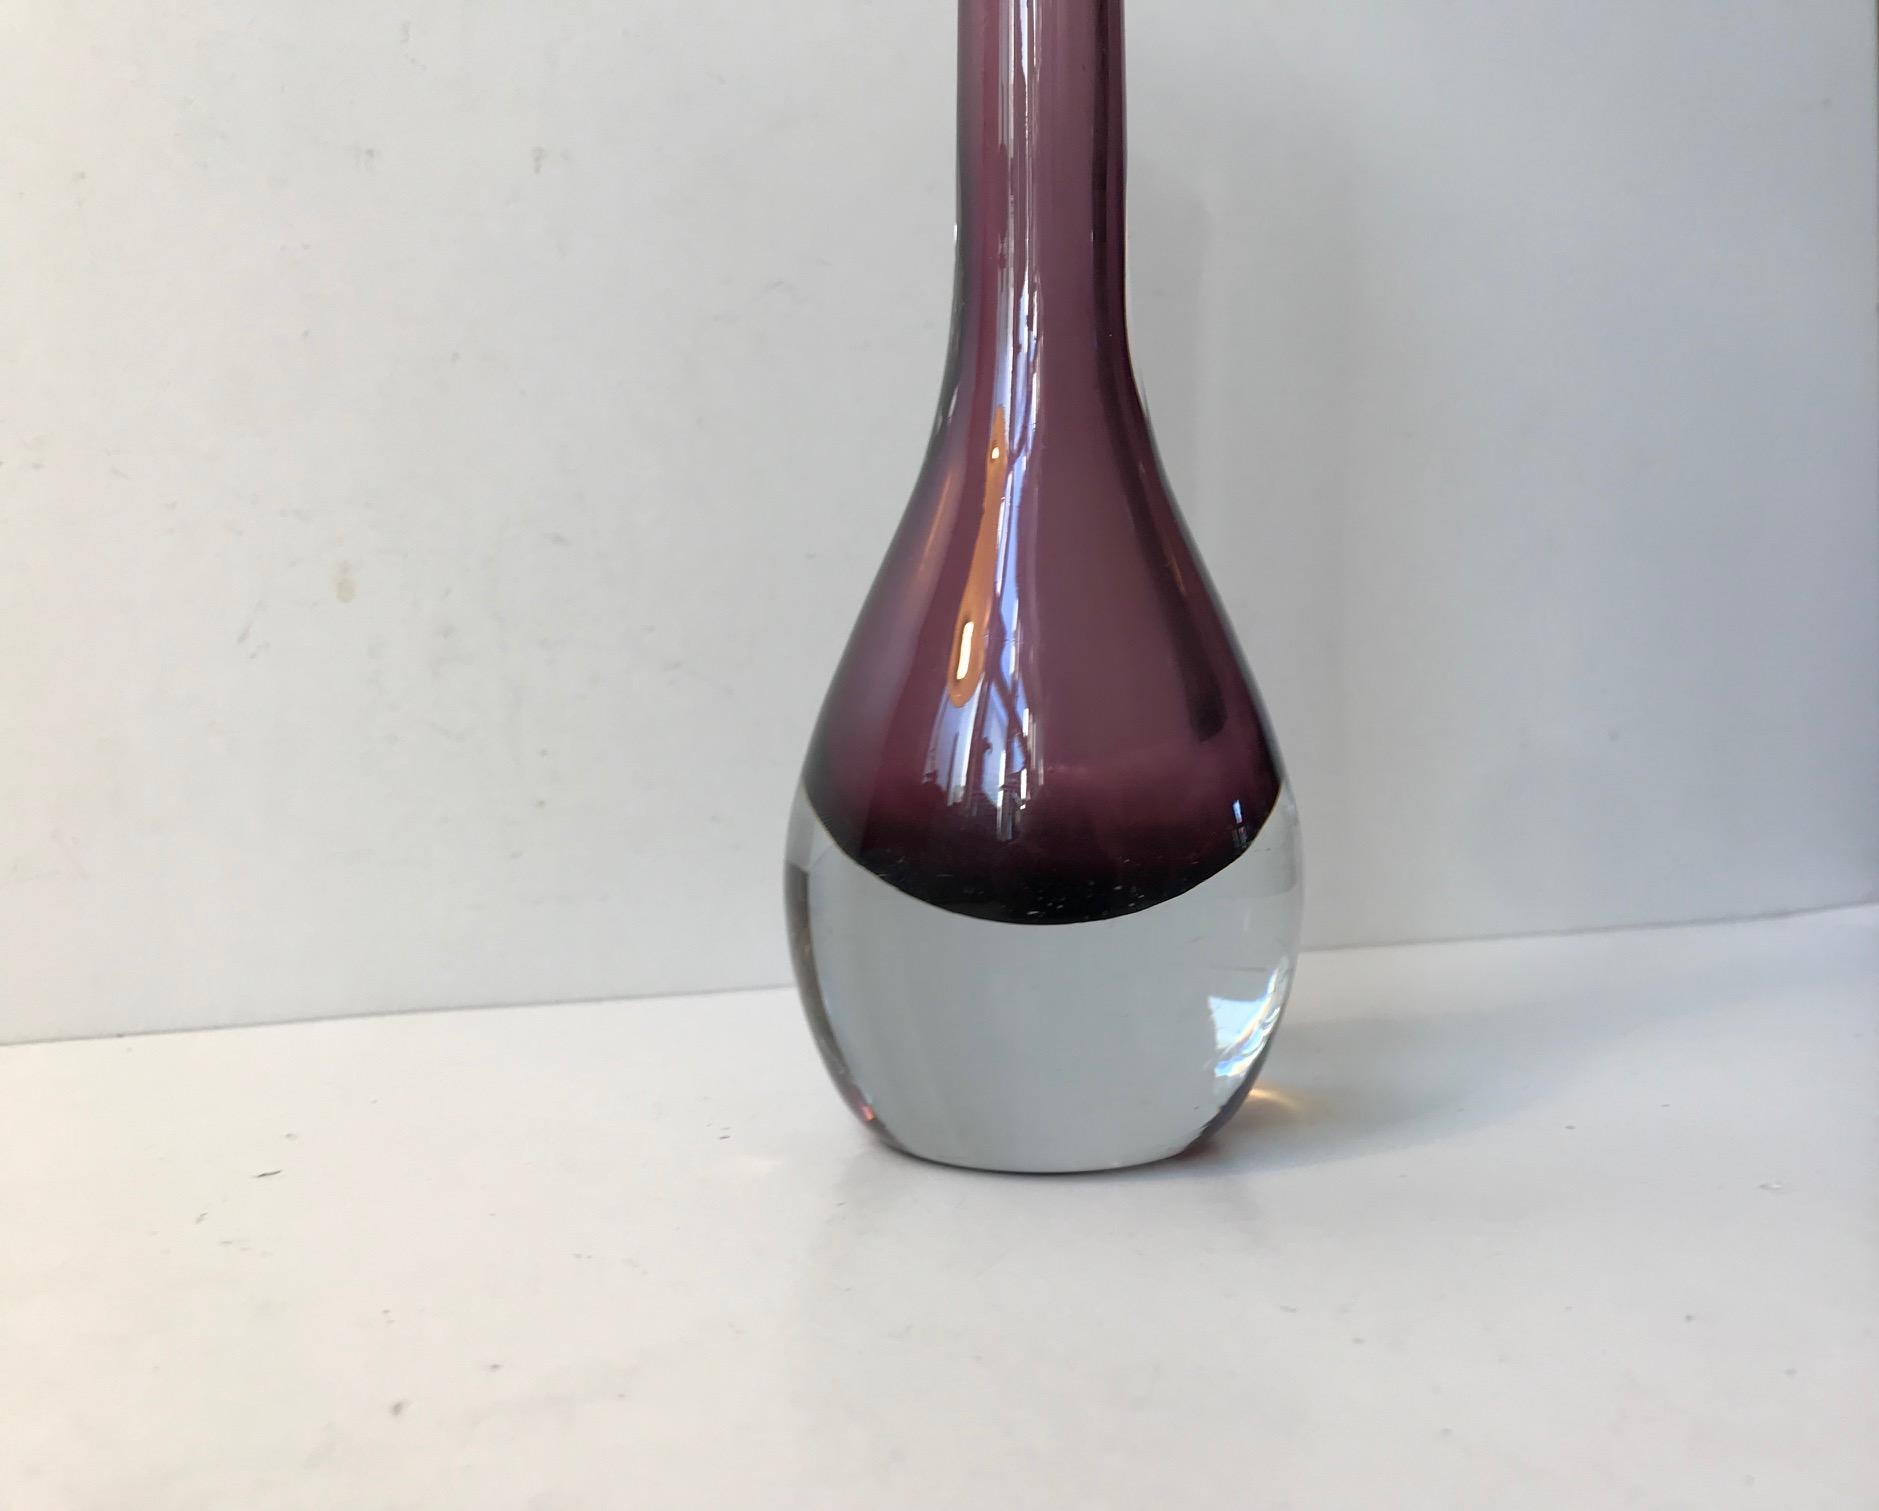 Hand blown glass vase with purple hues. A rare shaped designed by Gunnar Nylund and made at Stormbergshyttan in Sweden during the 1950s. The vase is marked or signed indistinguishable beneath its base.